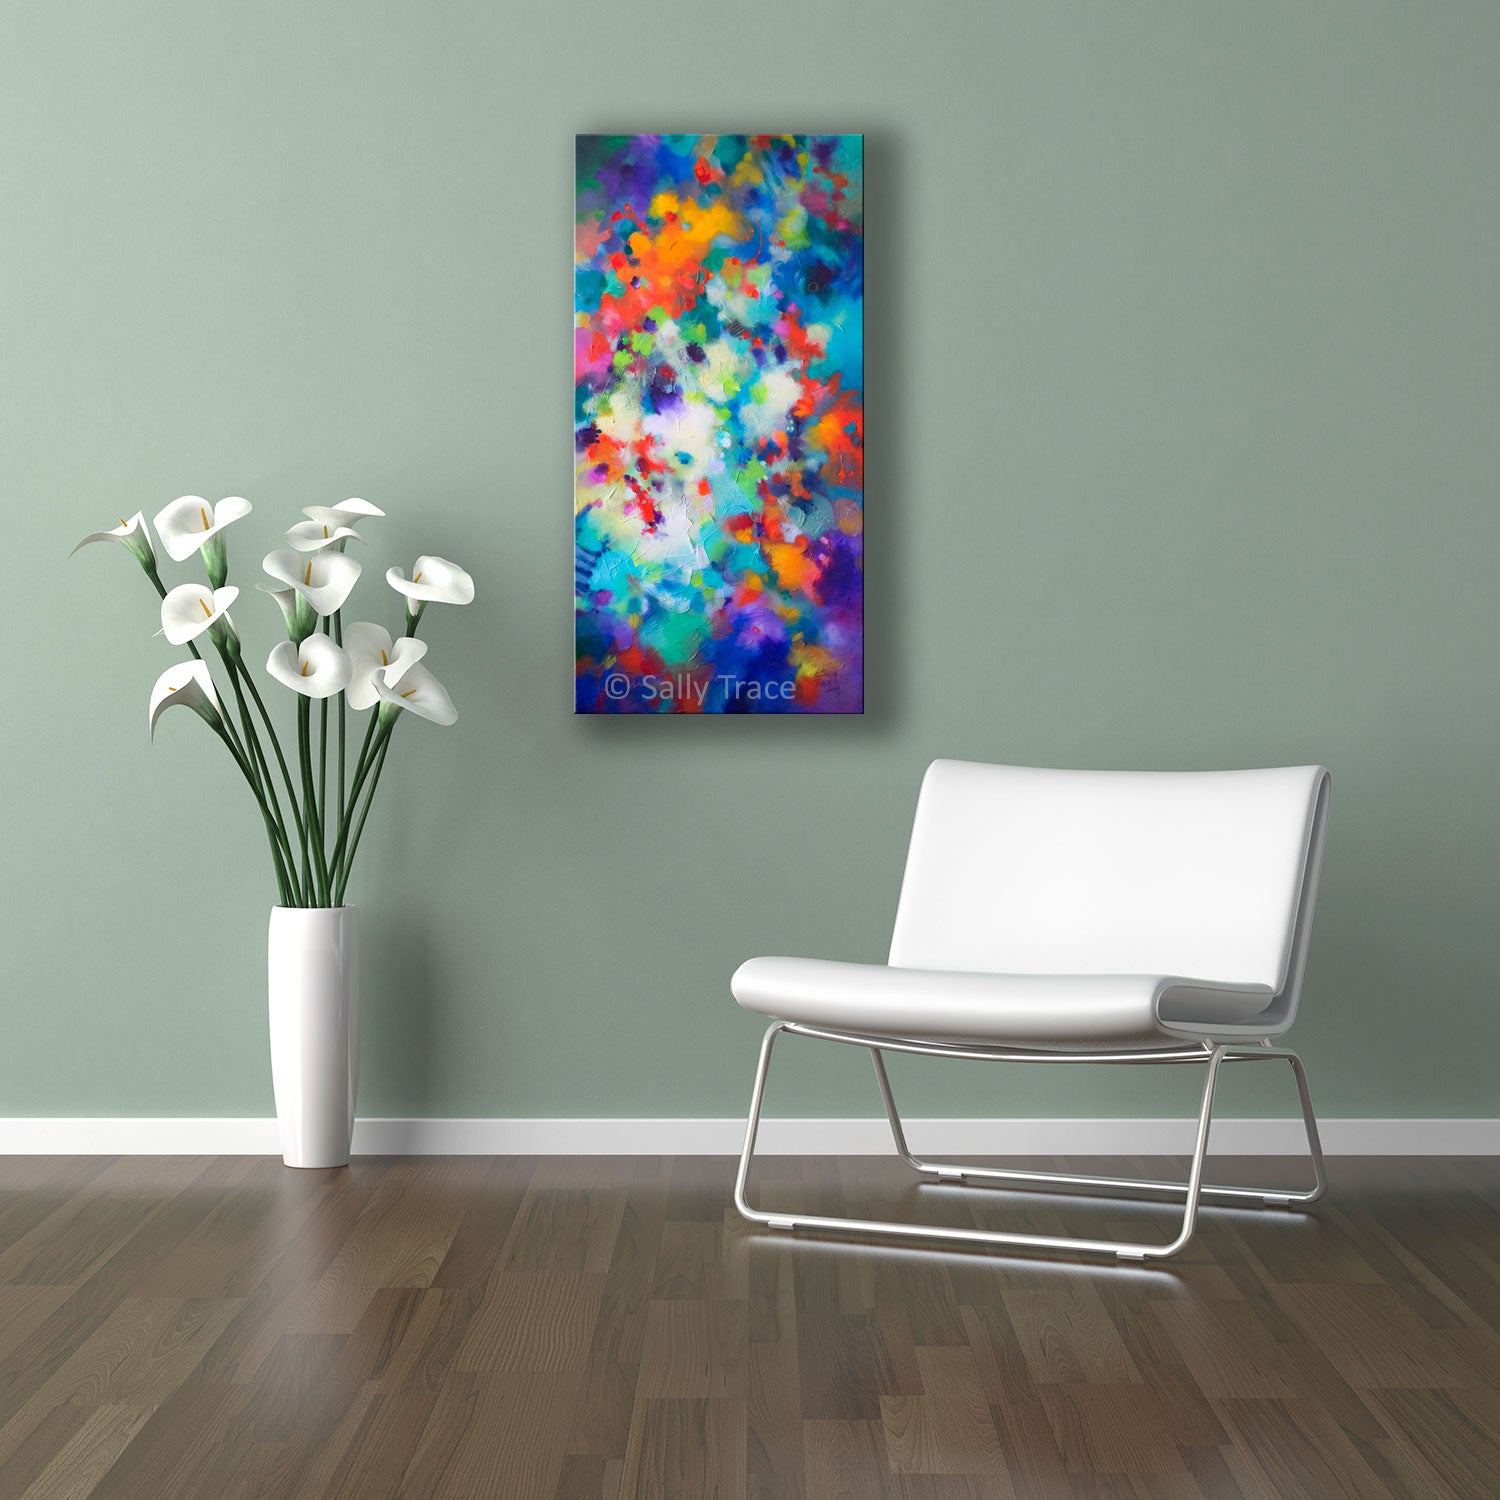 "Lifting Clouds" original fine art abstract textured painting for sale by Sally Trace, room view